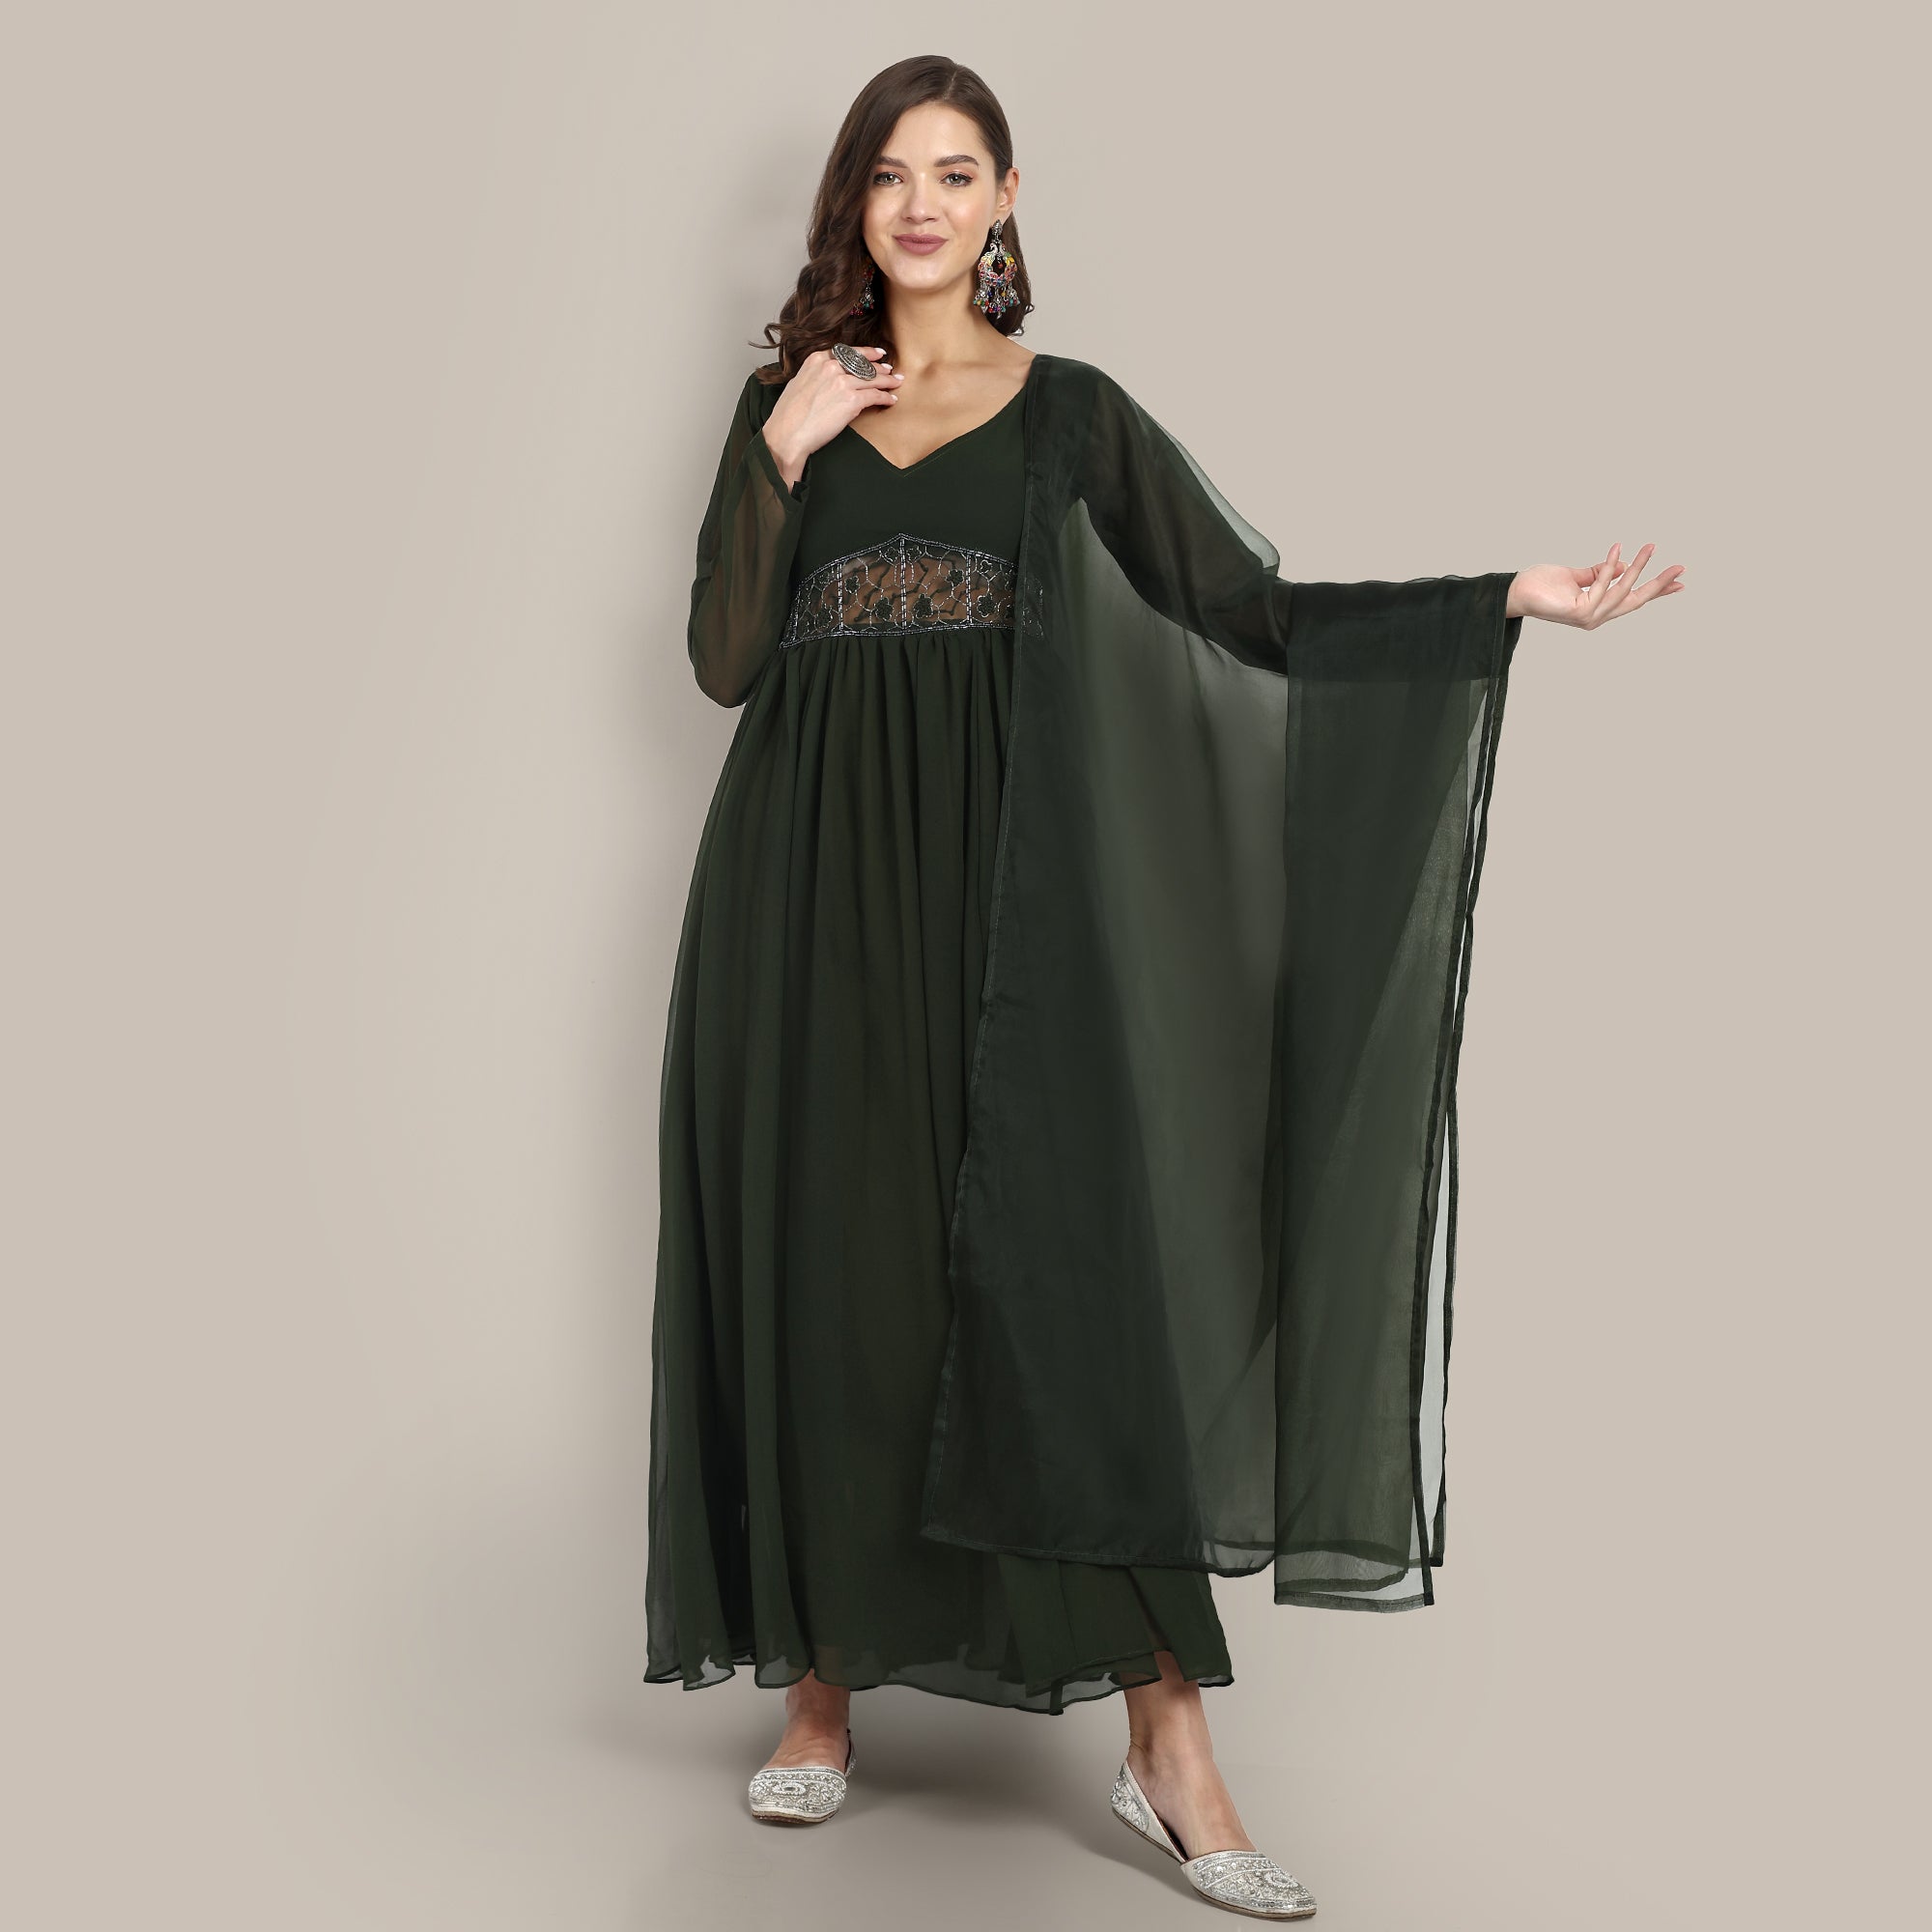 Green Anarkali Gown With V-Neckline, Handwork Panel At The Waist And Full Sleeves